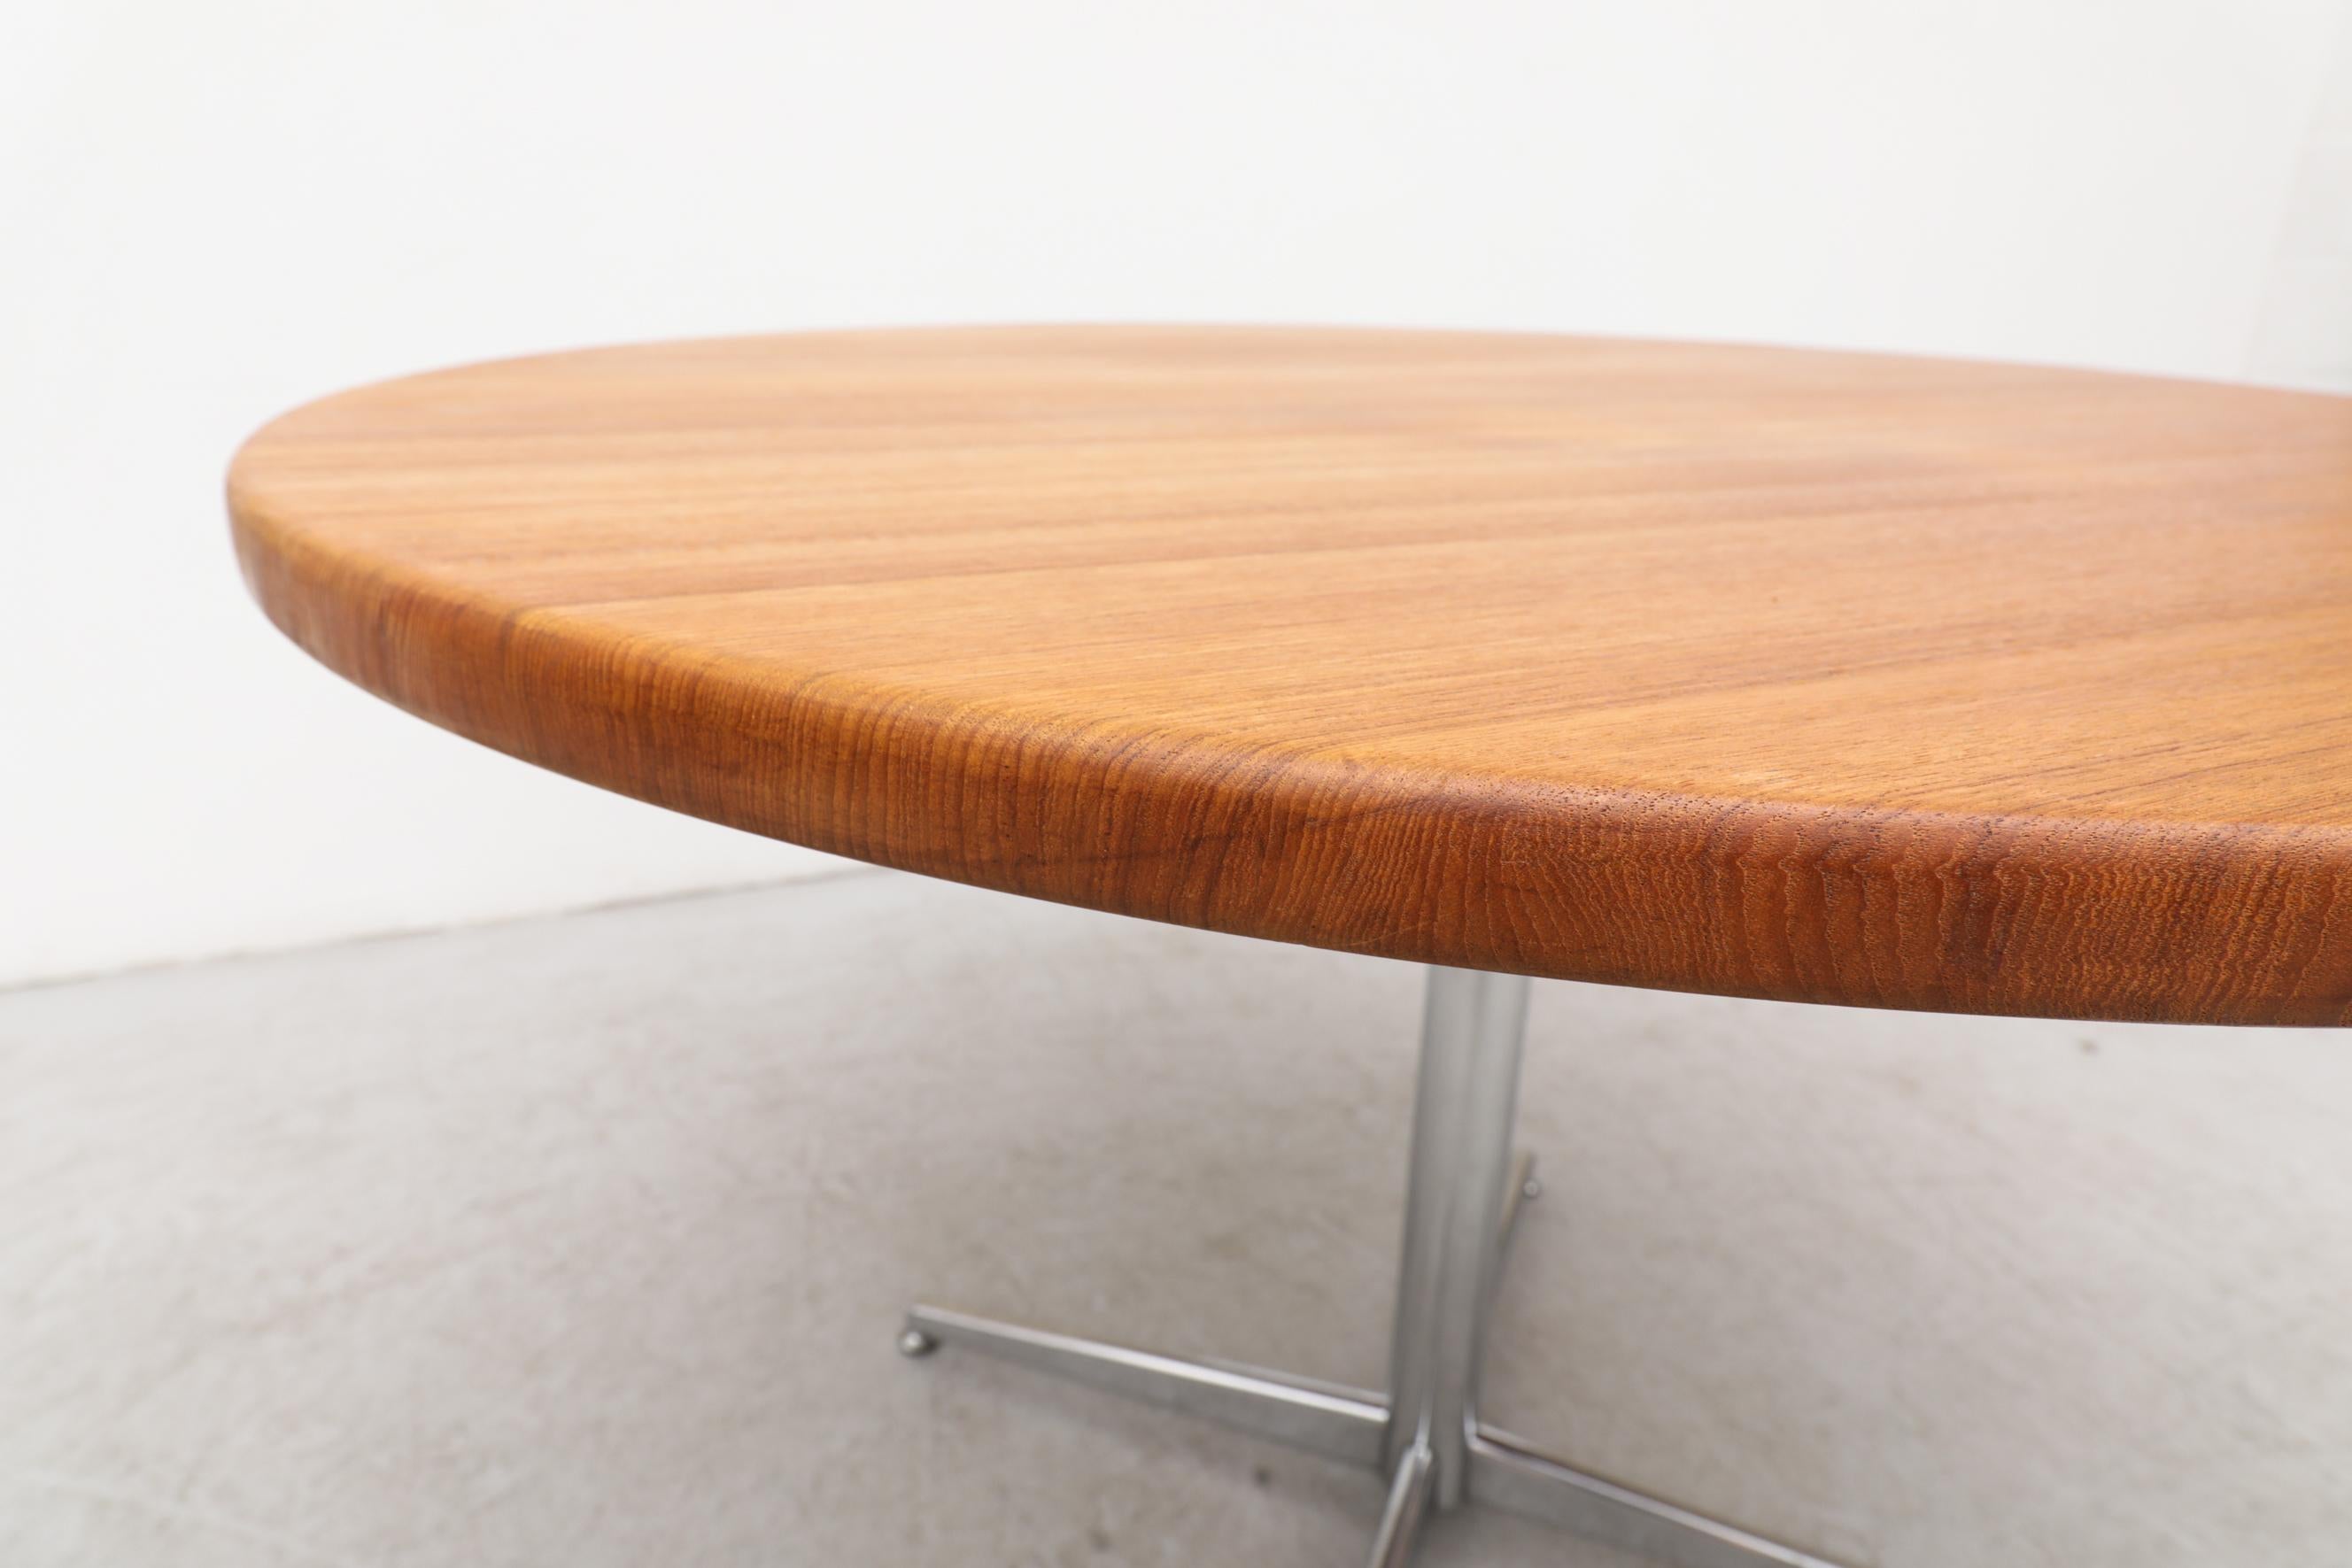 Herman Miller Inspired Solid Wood Topped Mid-Century Pedestal Table 4